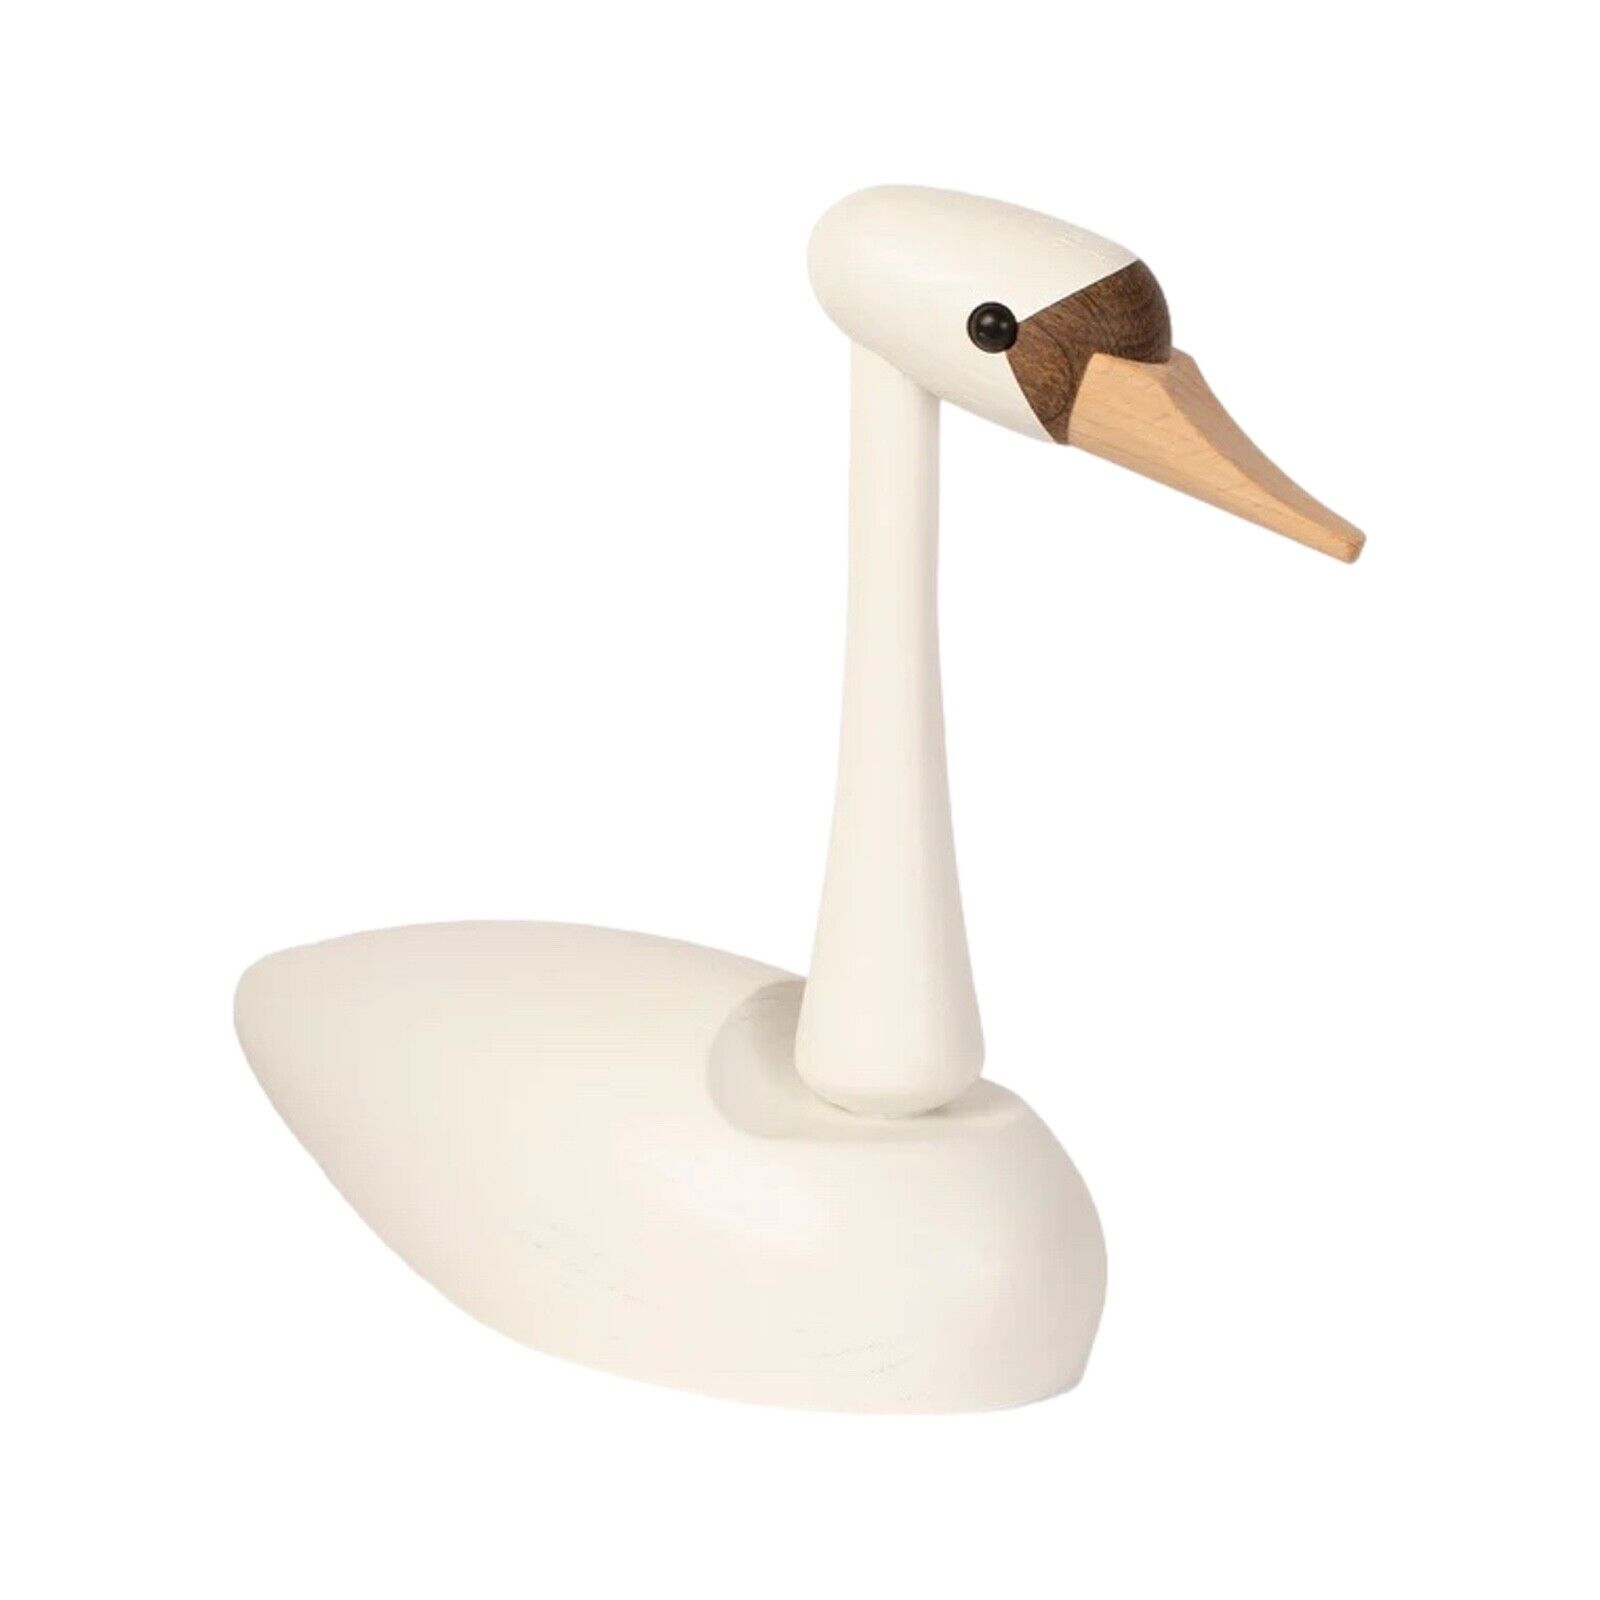 The Swan By Spring Copenhagen Made From Oak Ash And Beech Danish Design